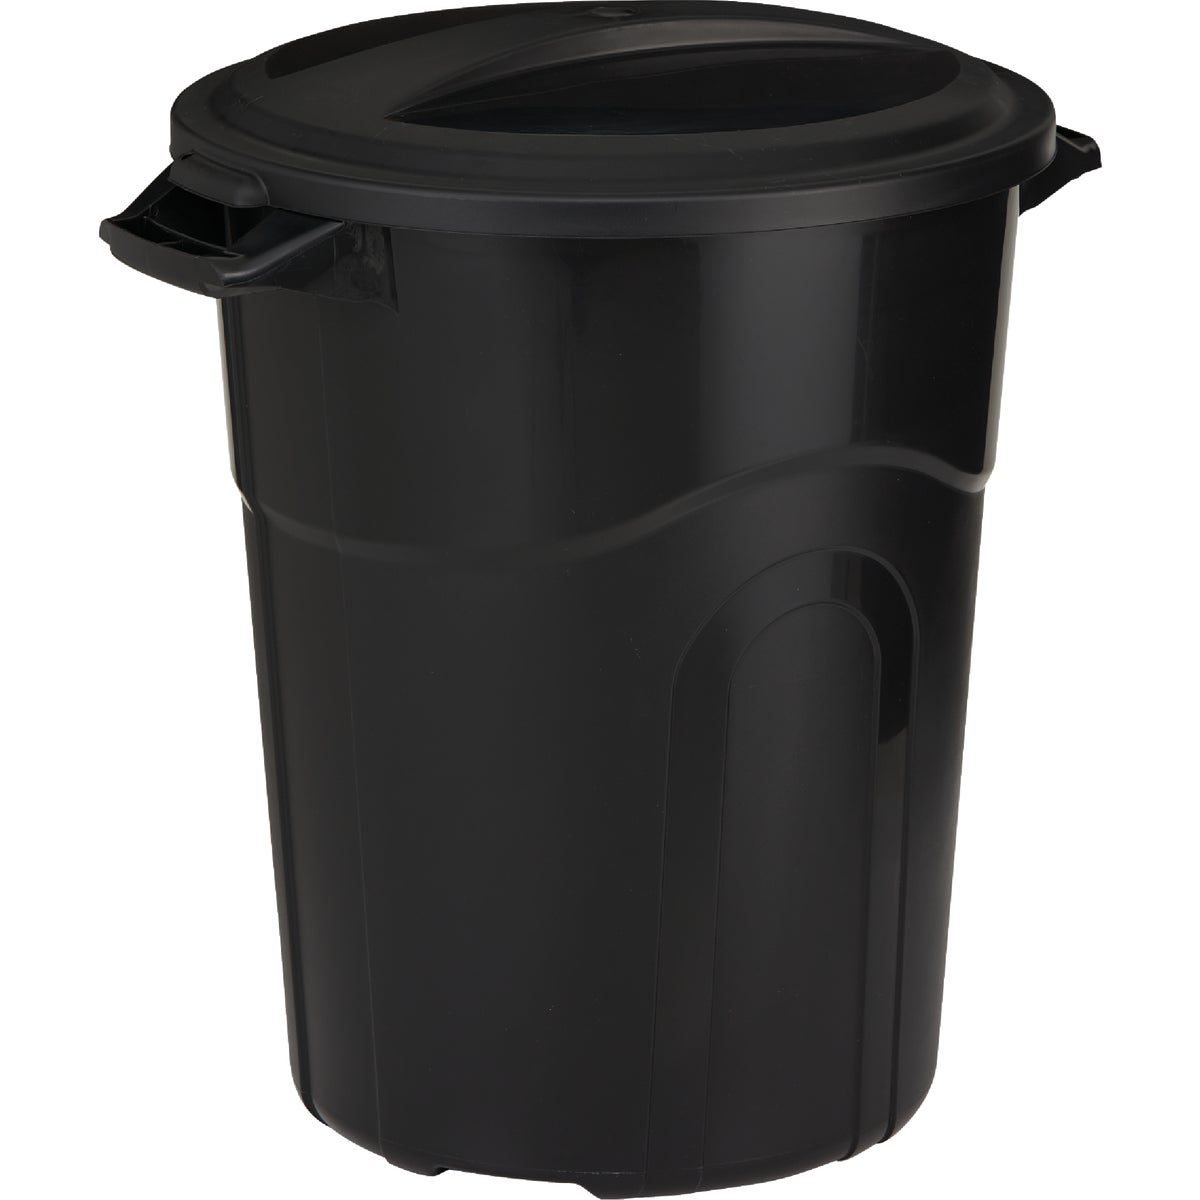 United Solutions Rough & Rugged 20 Gal. Black Trash Can with Lid